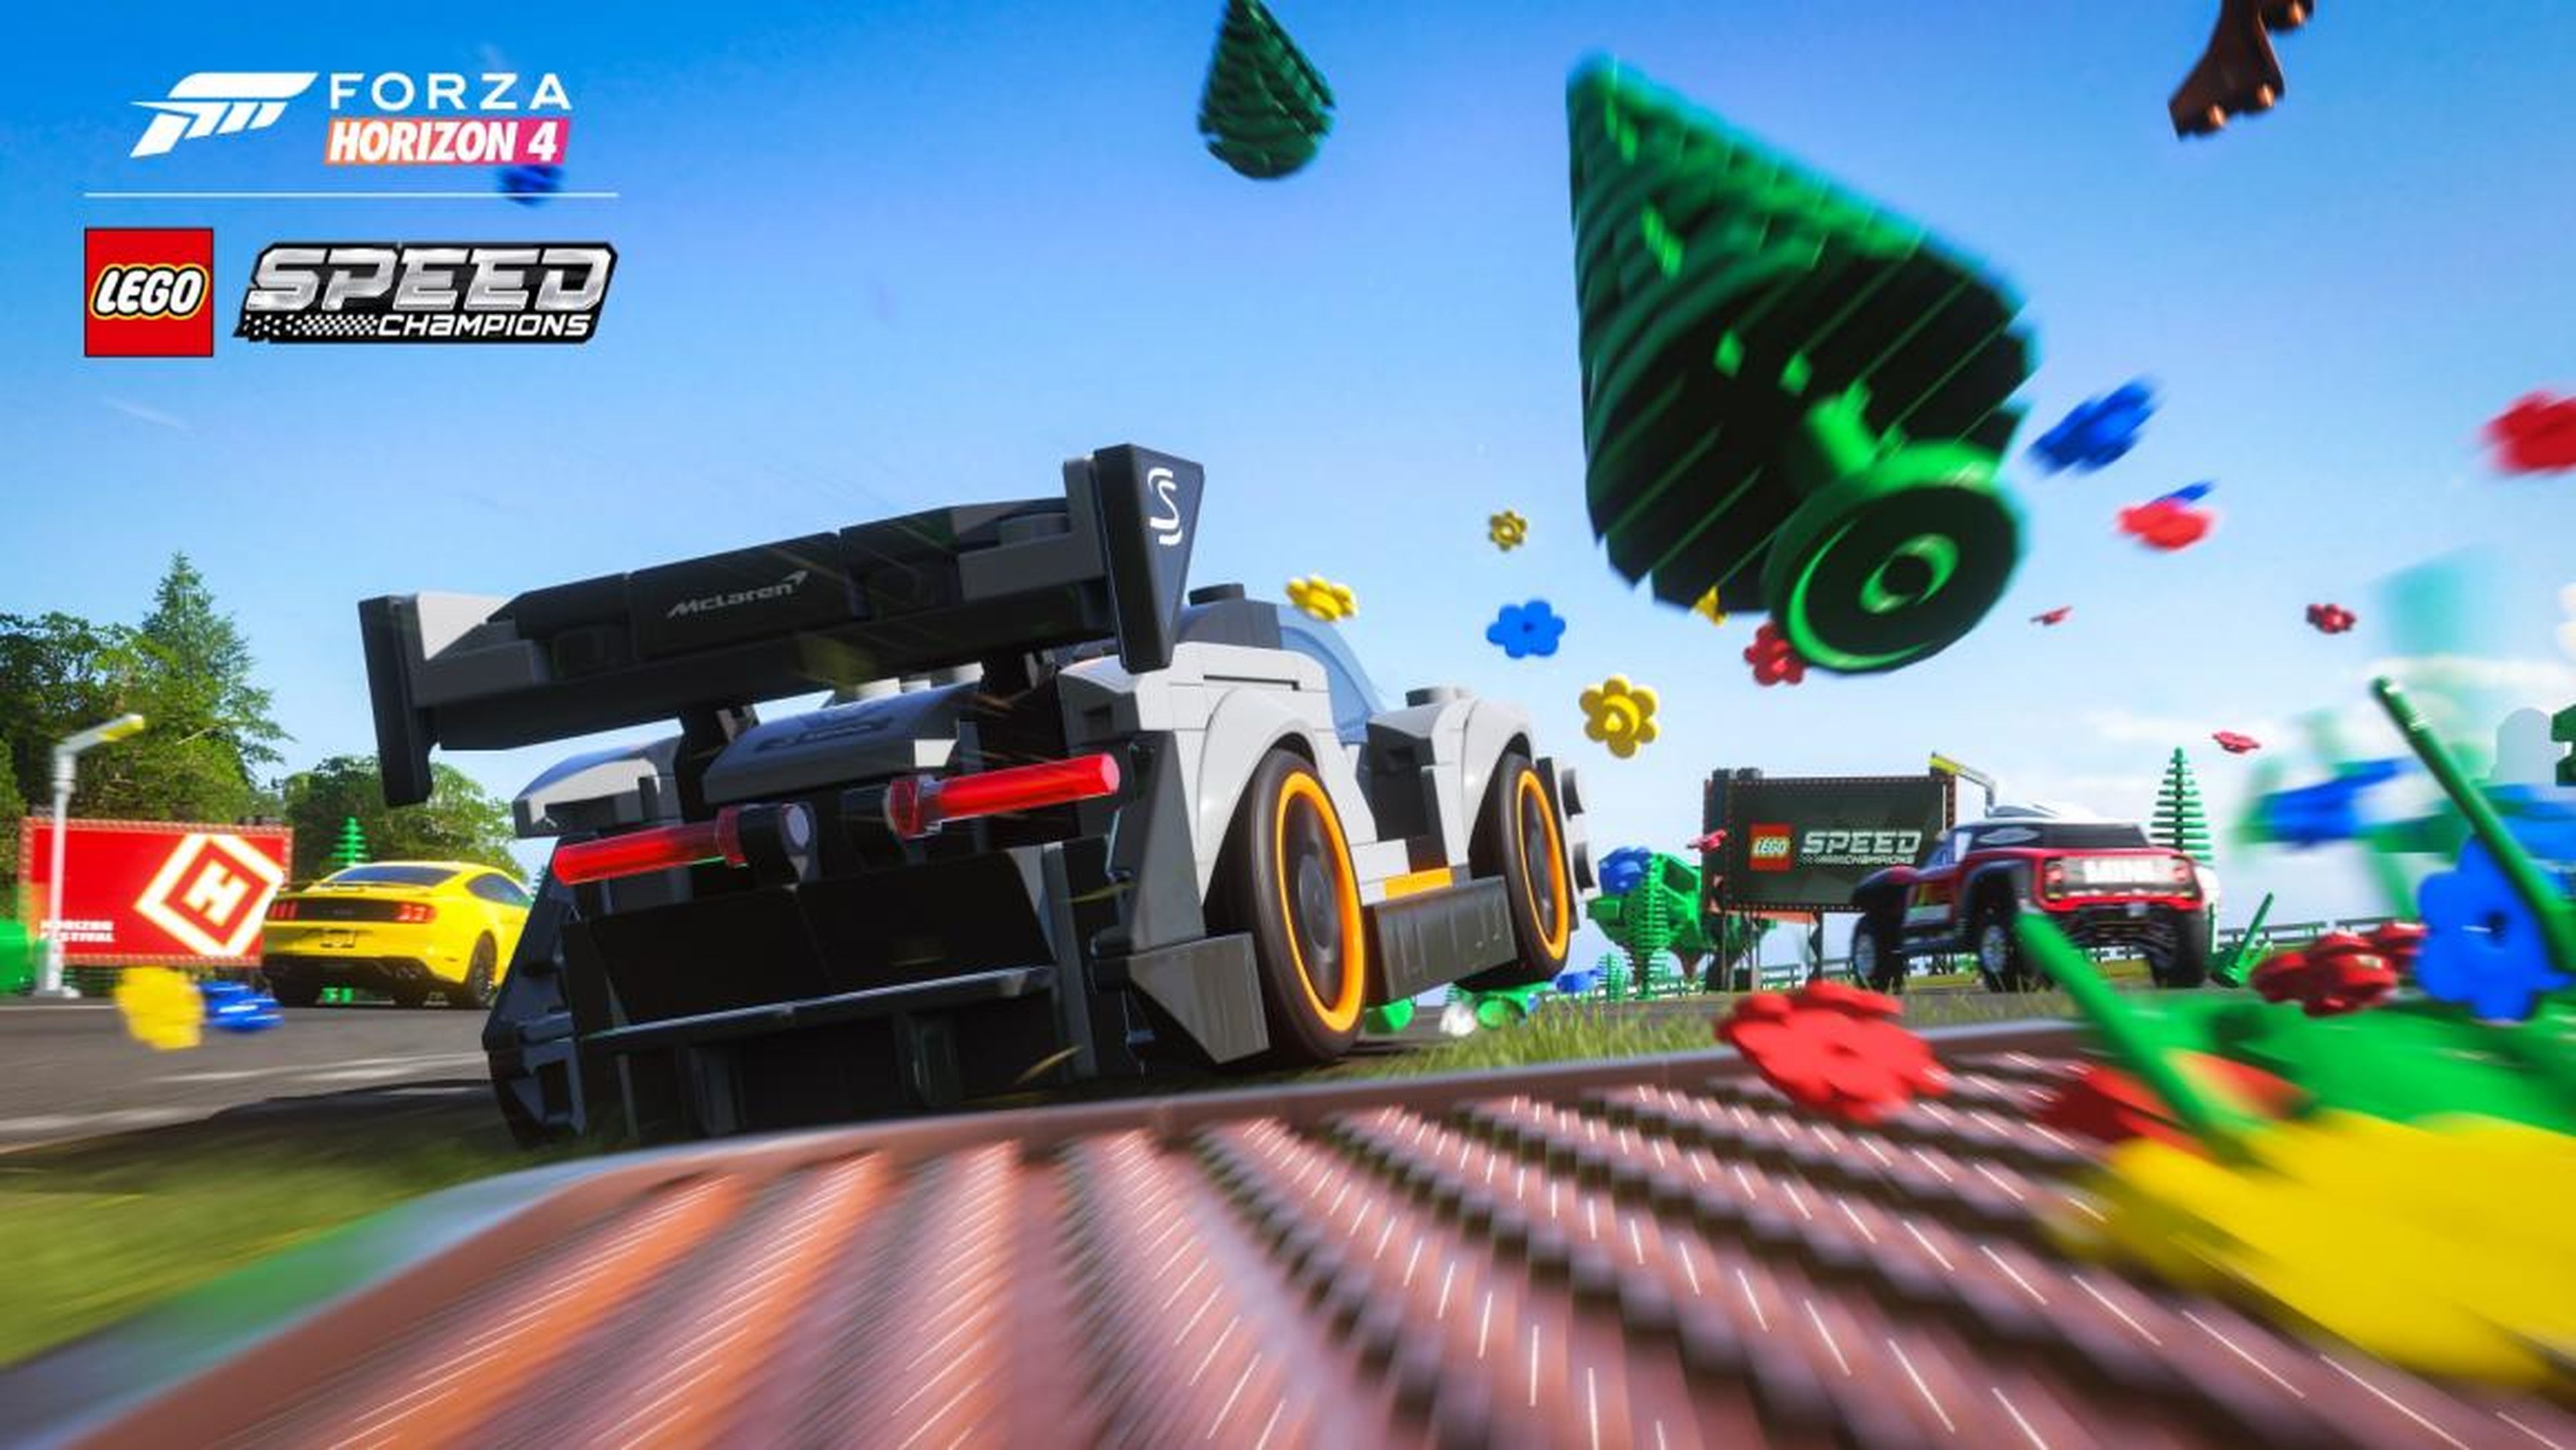 Instead of a new "Forza" game this year, Microsoft unveiled a Lego-themed addition to last year's "Forza Horizon 4."